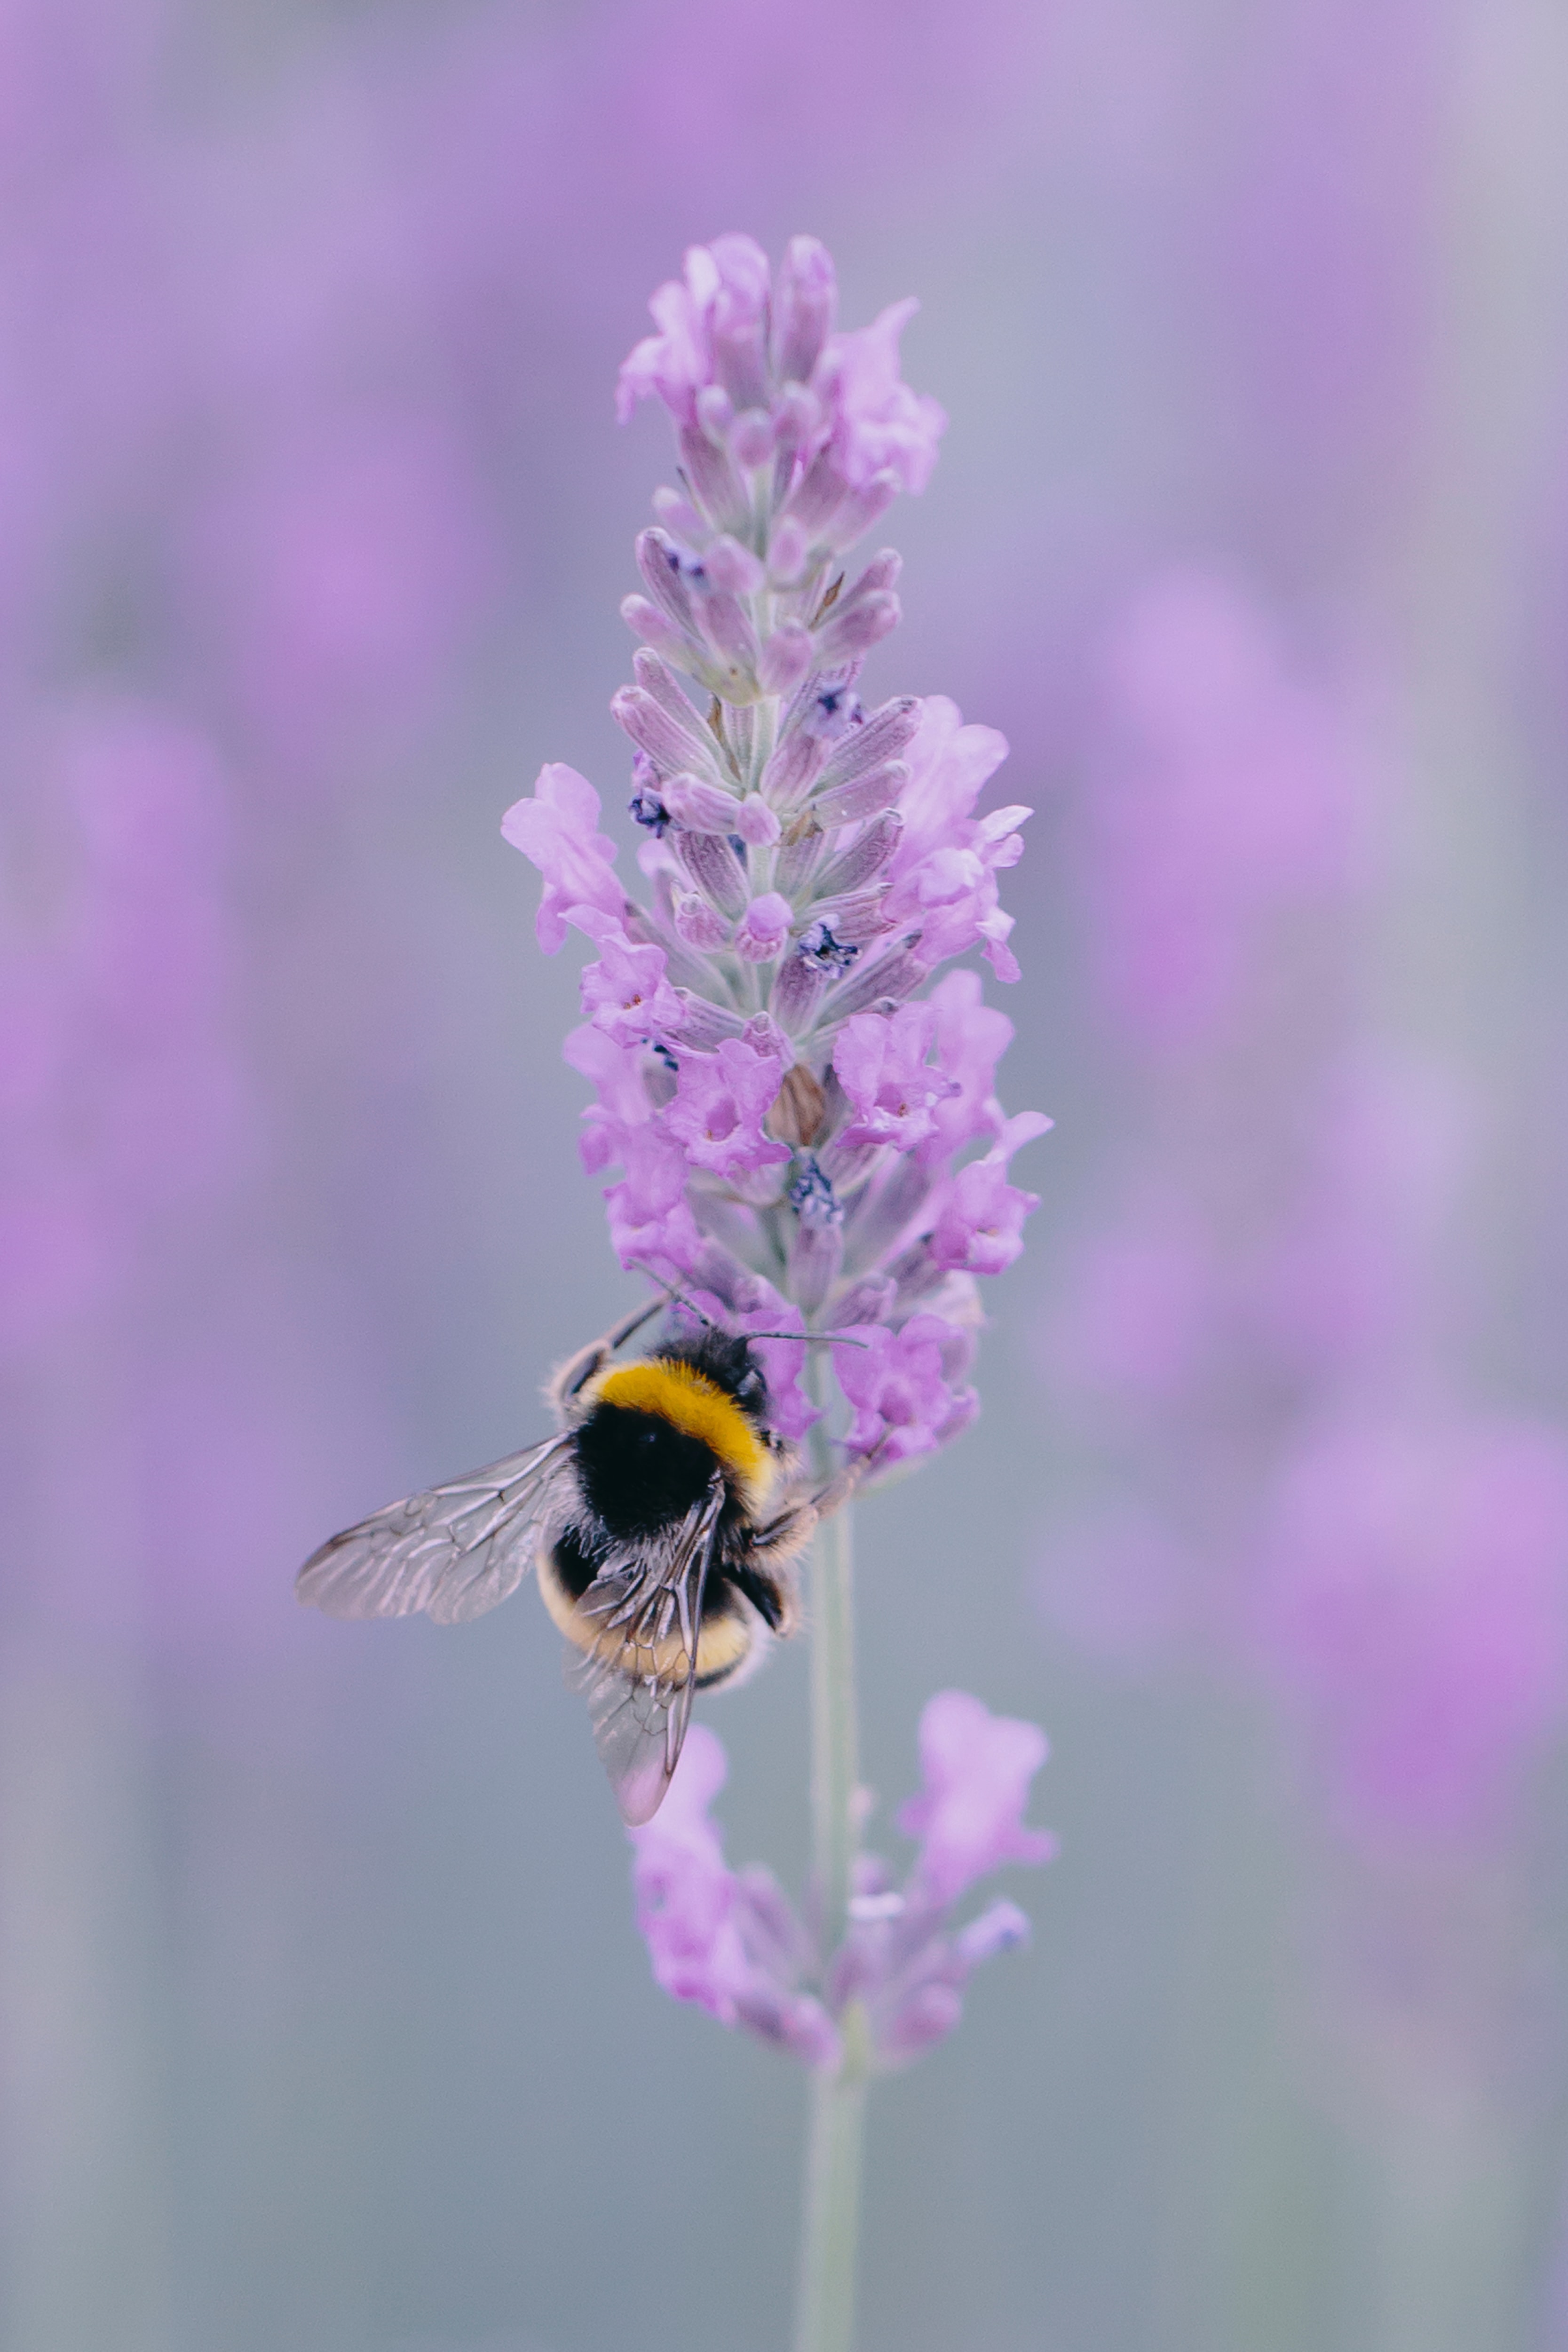 153529 Screensavers and Wallpapers Bee for phone. Download flower, macro, bee, wings, lavender pictures for free